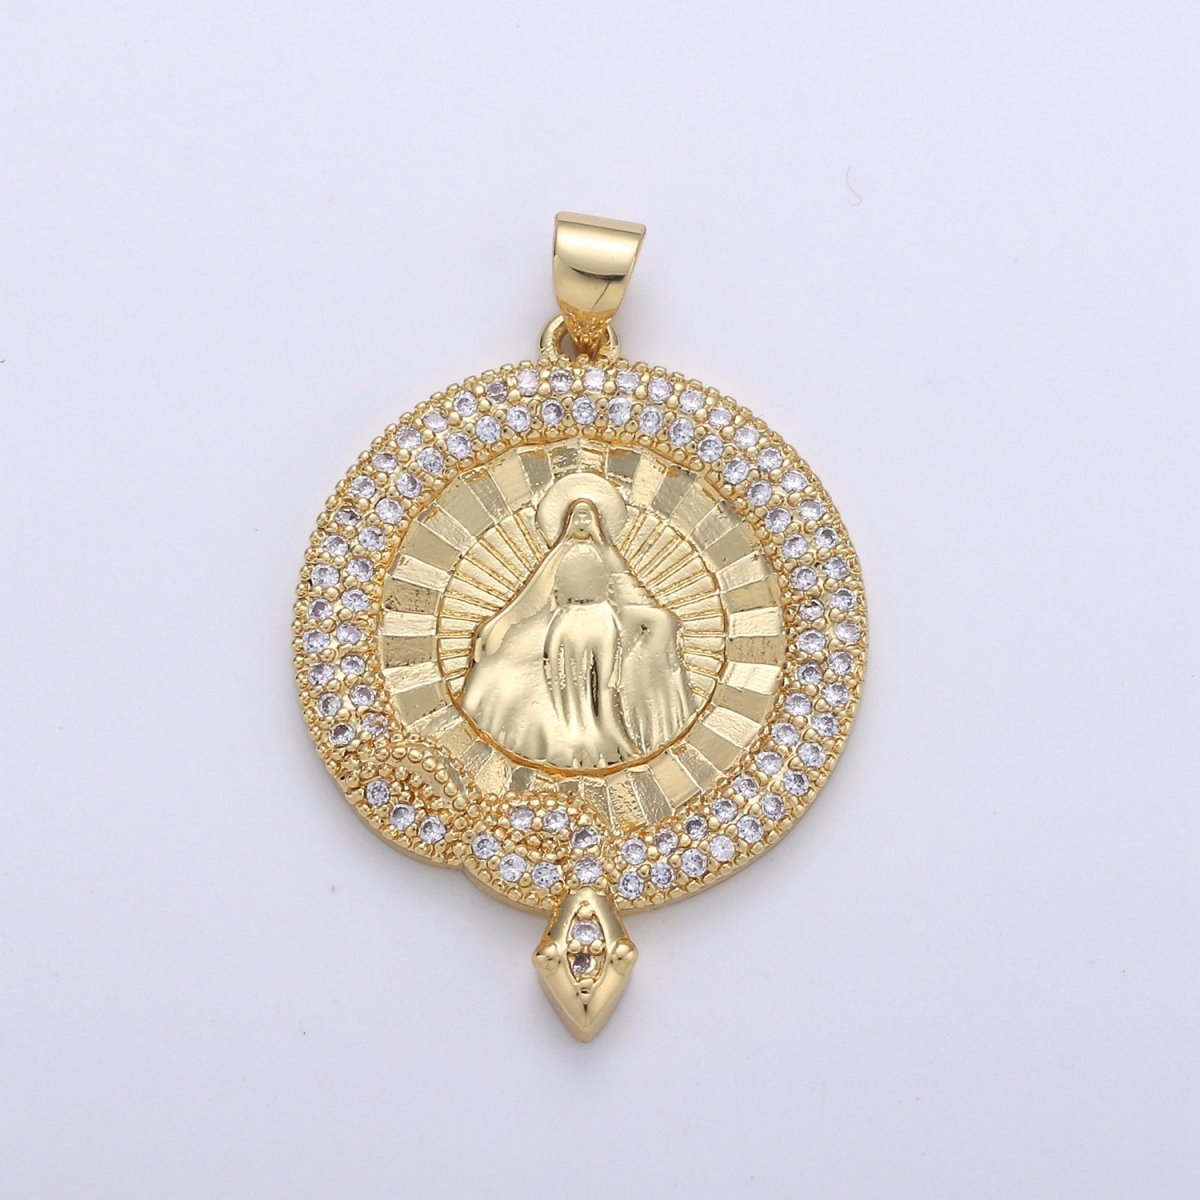 24K Gold Filled Our Lady of Guadalupe Virgin Mary Round Circle Delicate Micro Pve Charm Necklace for Religious Jewelry Pendant I-645 - DLUXCA